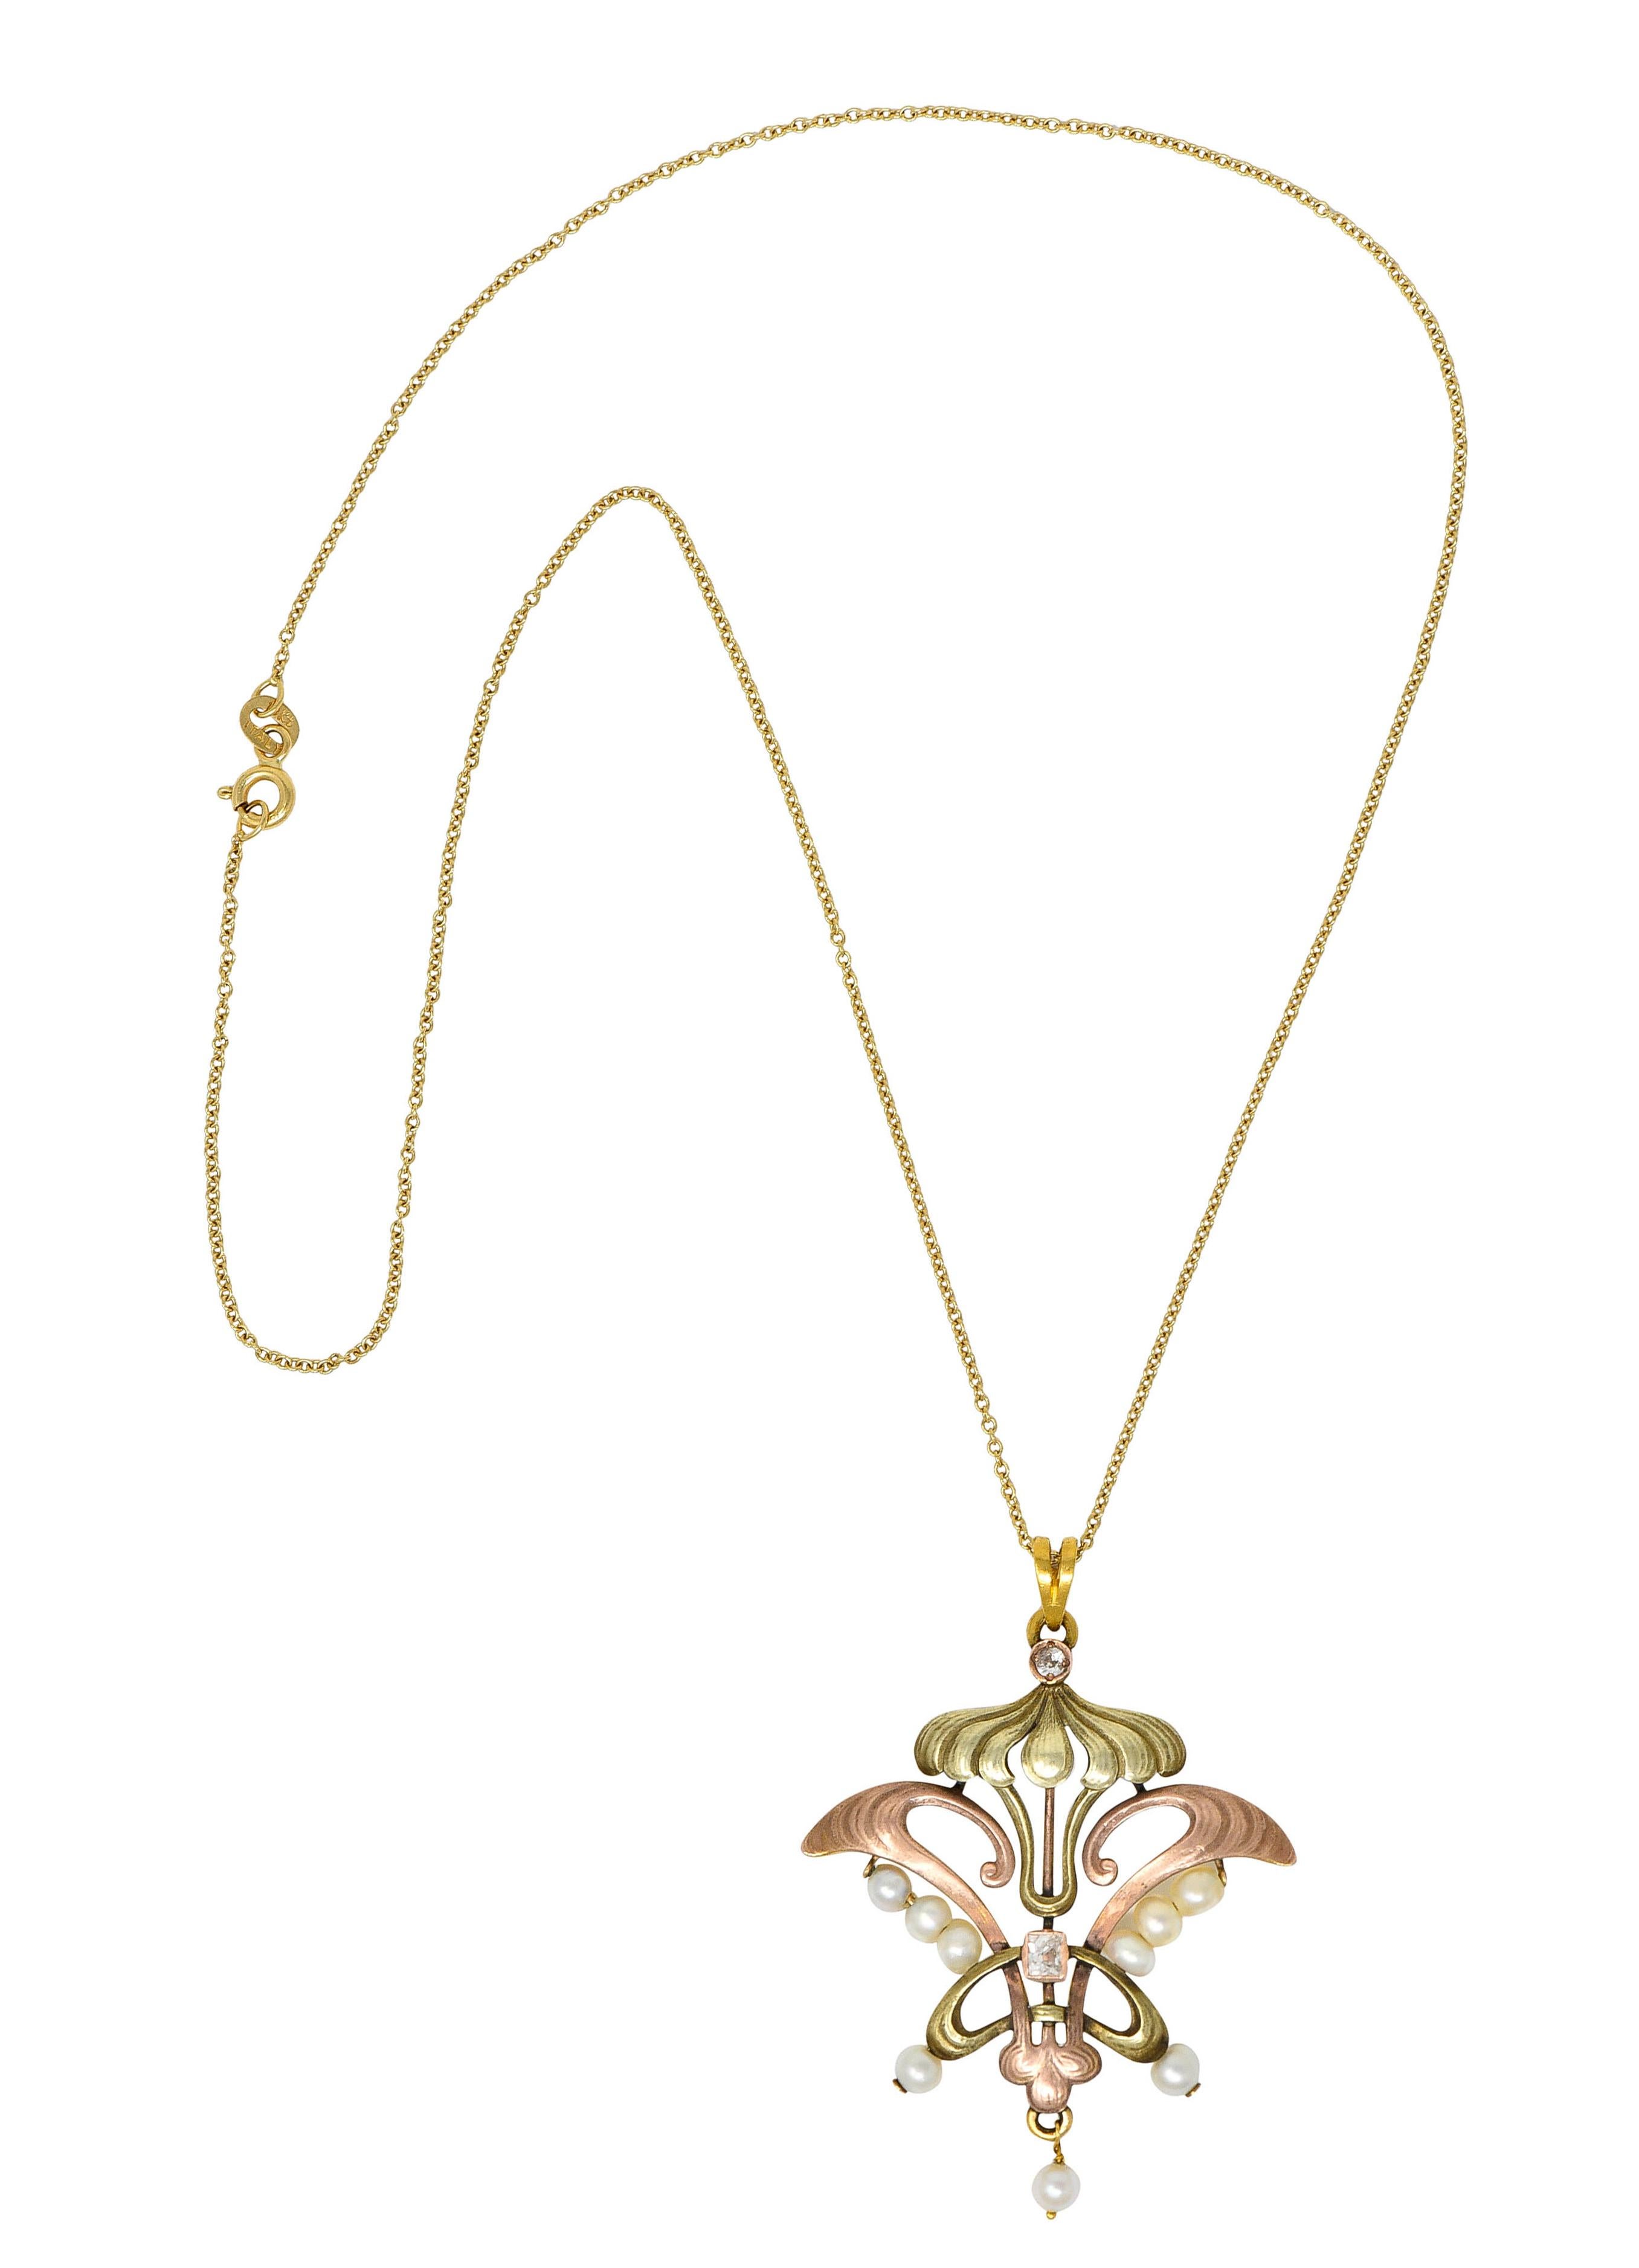 Classic cable chain necklace suspends a pendant comprised of rose and green gold repoussè whiplash

Centering an old mine cut diamond weighing approximately 0.15 carat - F color with SI clarity

With an 0.08 carat old European cut diamond set near